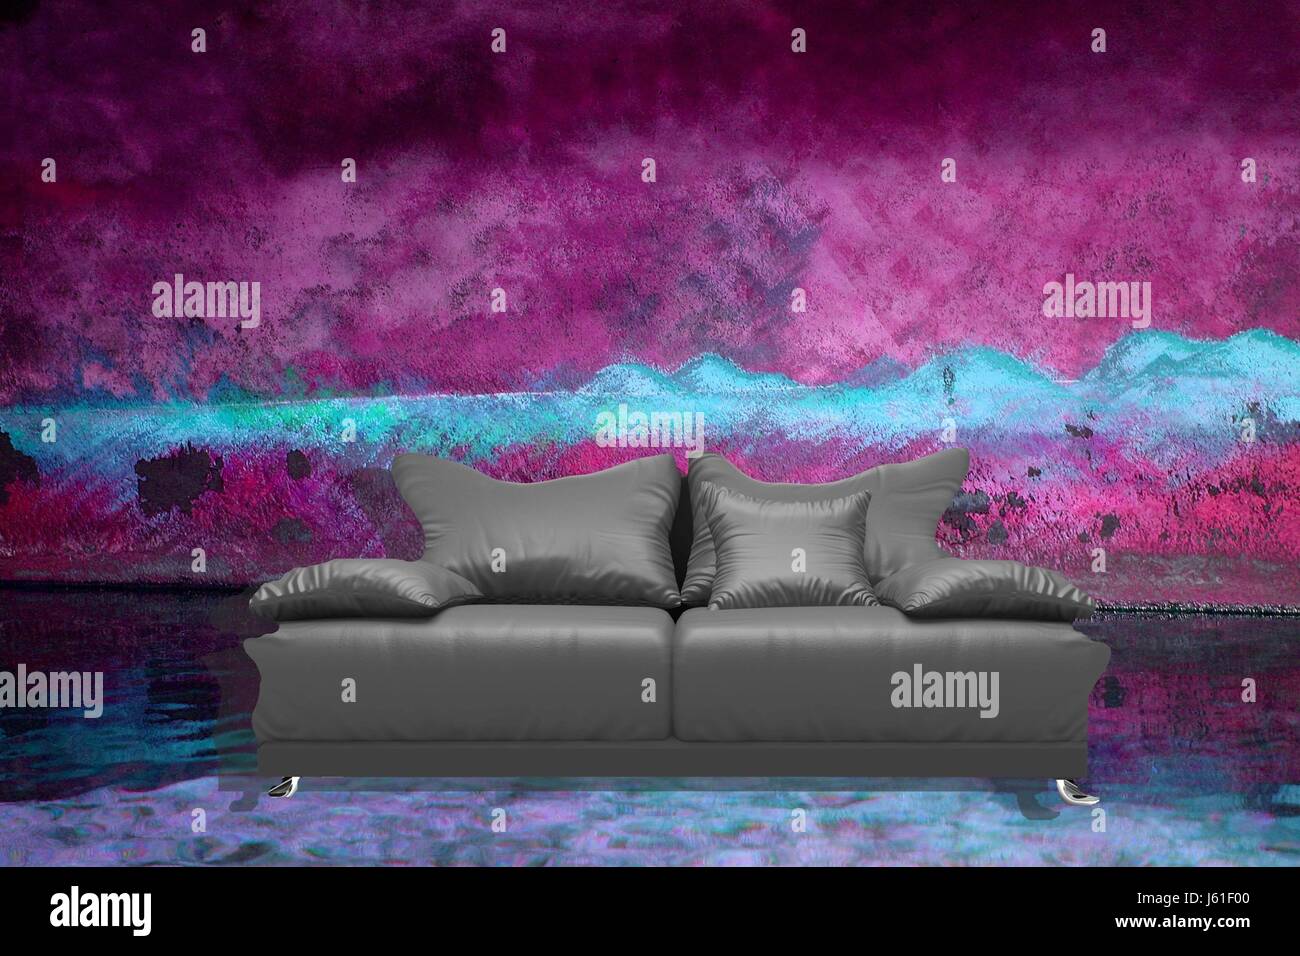 room institution couch sofa divan wall art room painting institution couch sofa Stock Photo